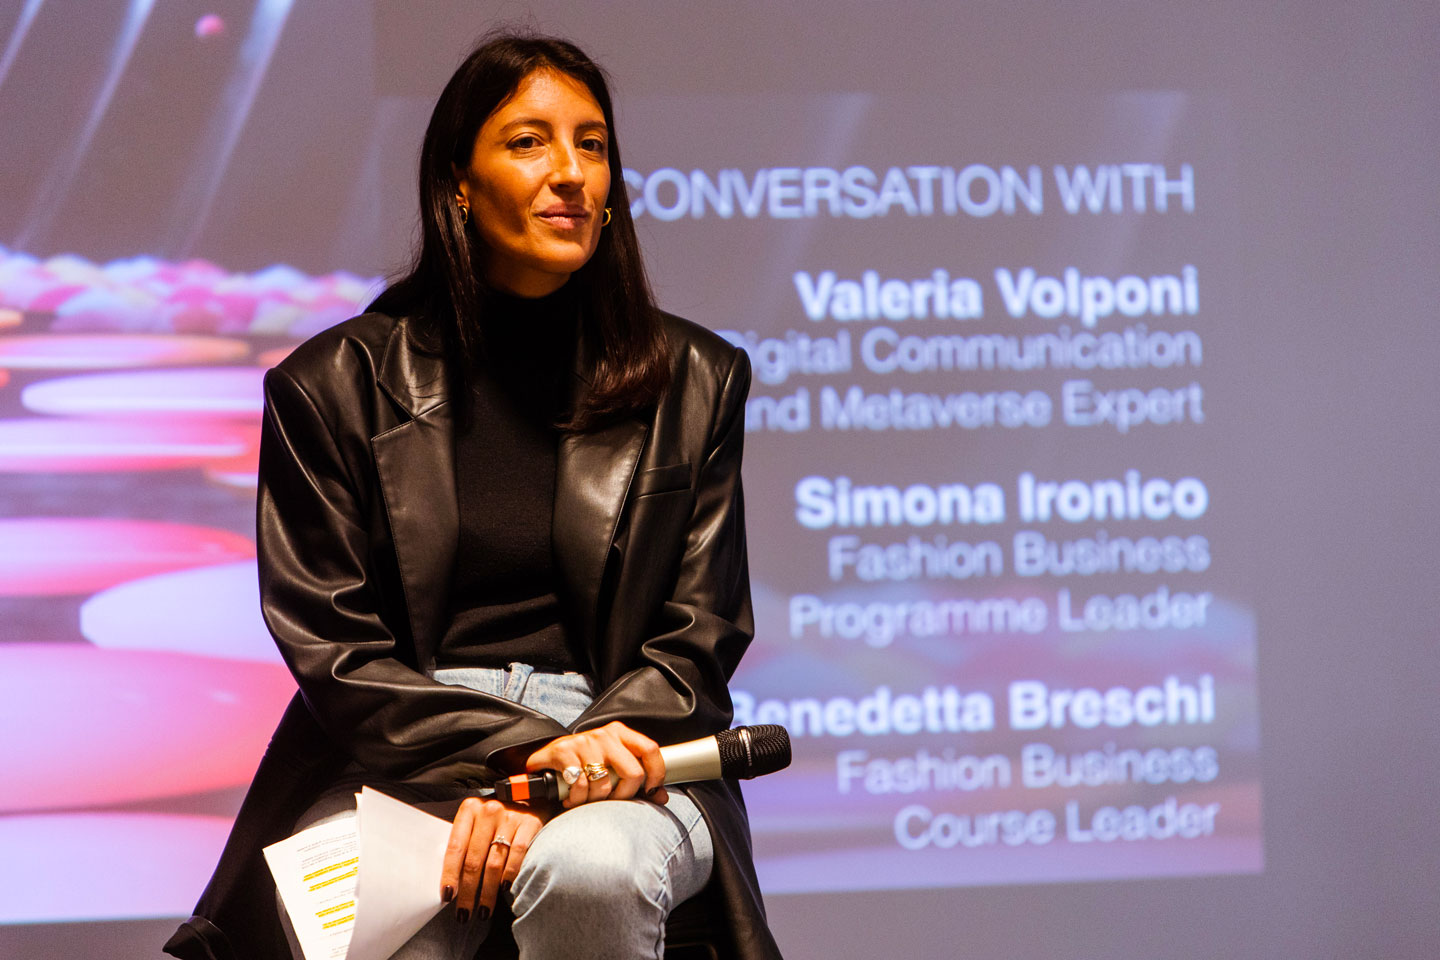 Benedetta Breschi, Marketing Lecturer at istituto Marangoni Milano, joined the conversation with author Valeria Volponi